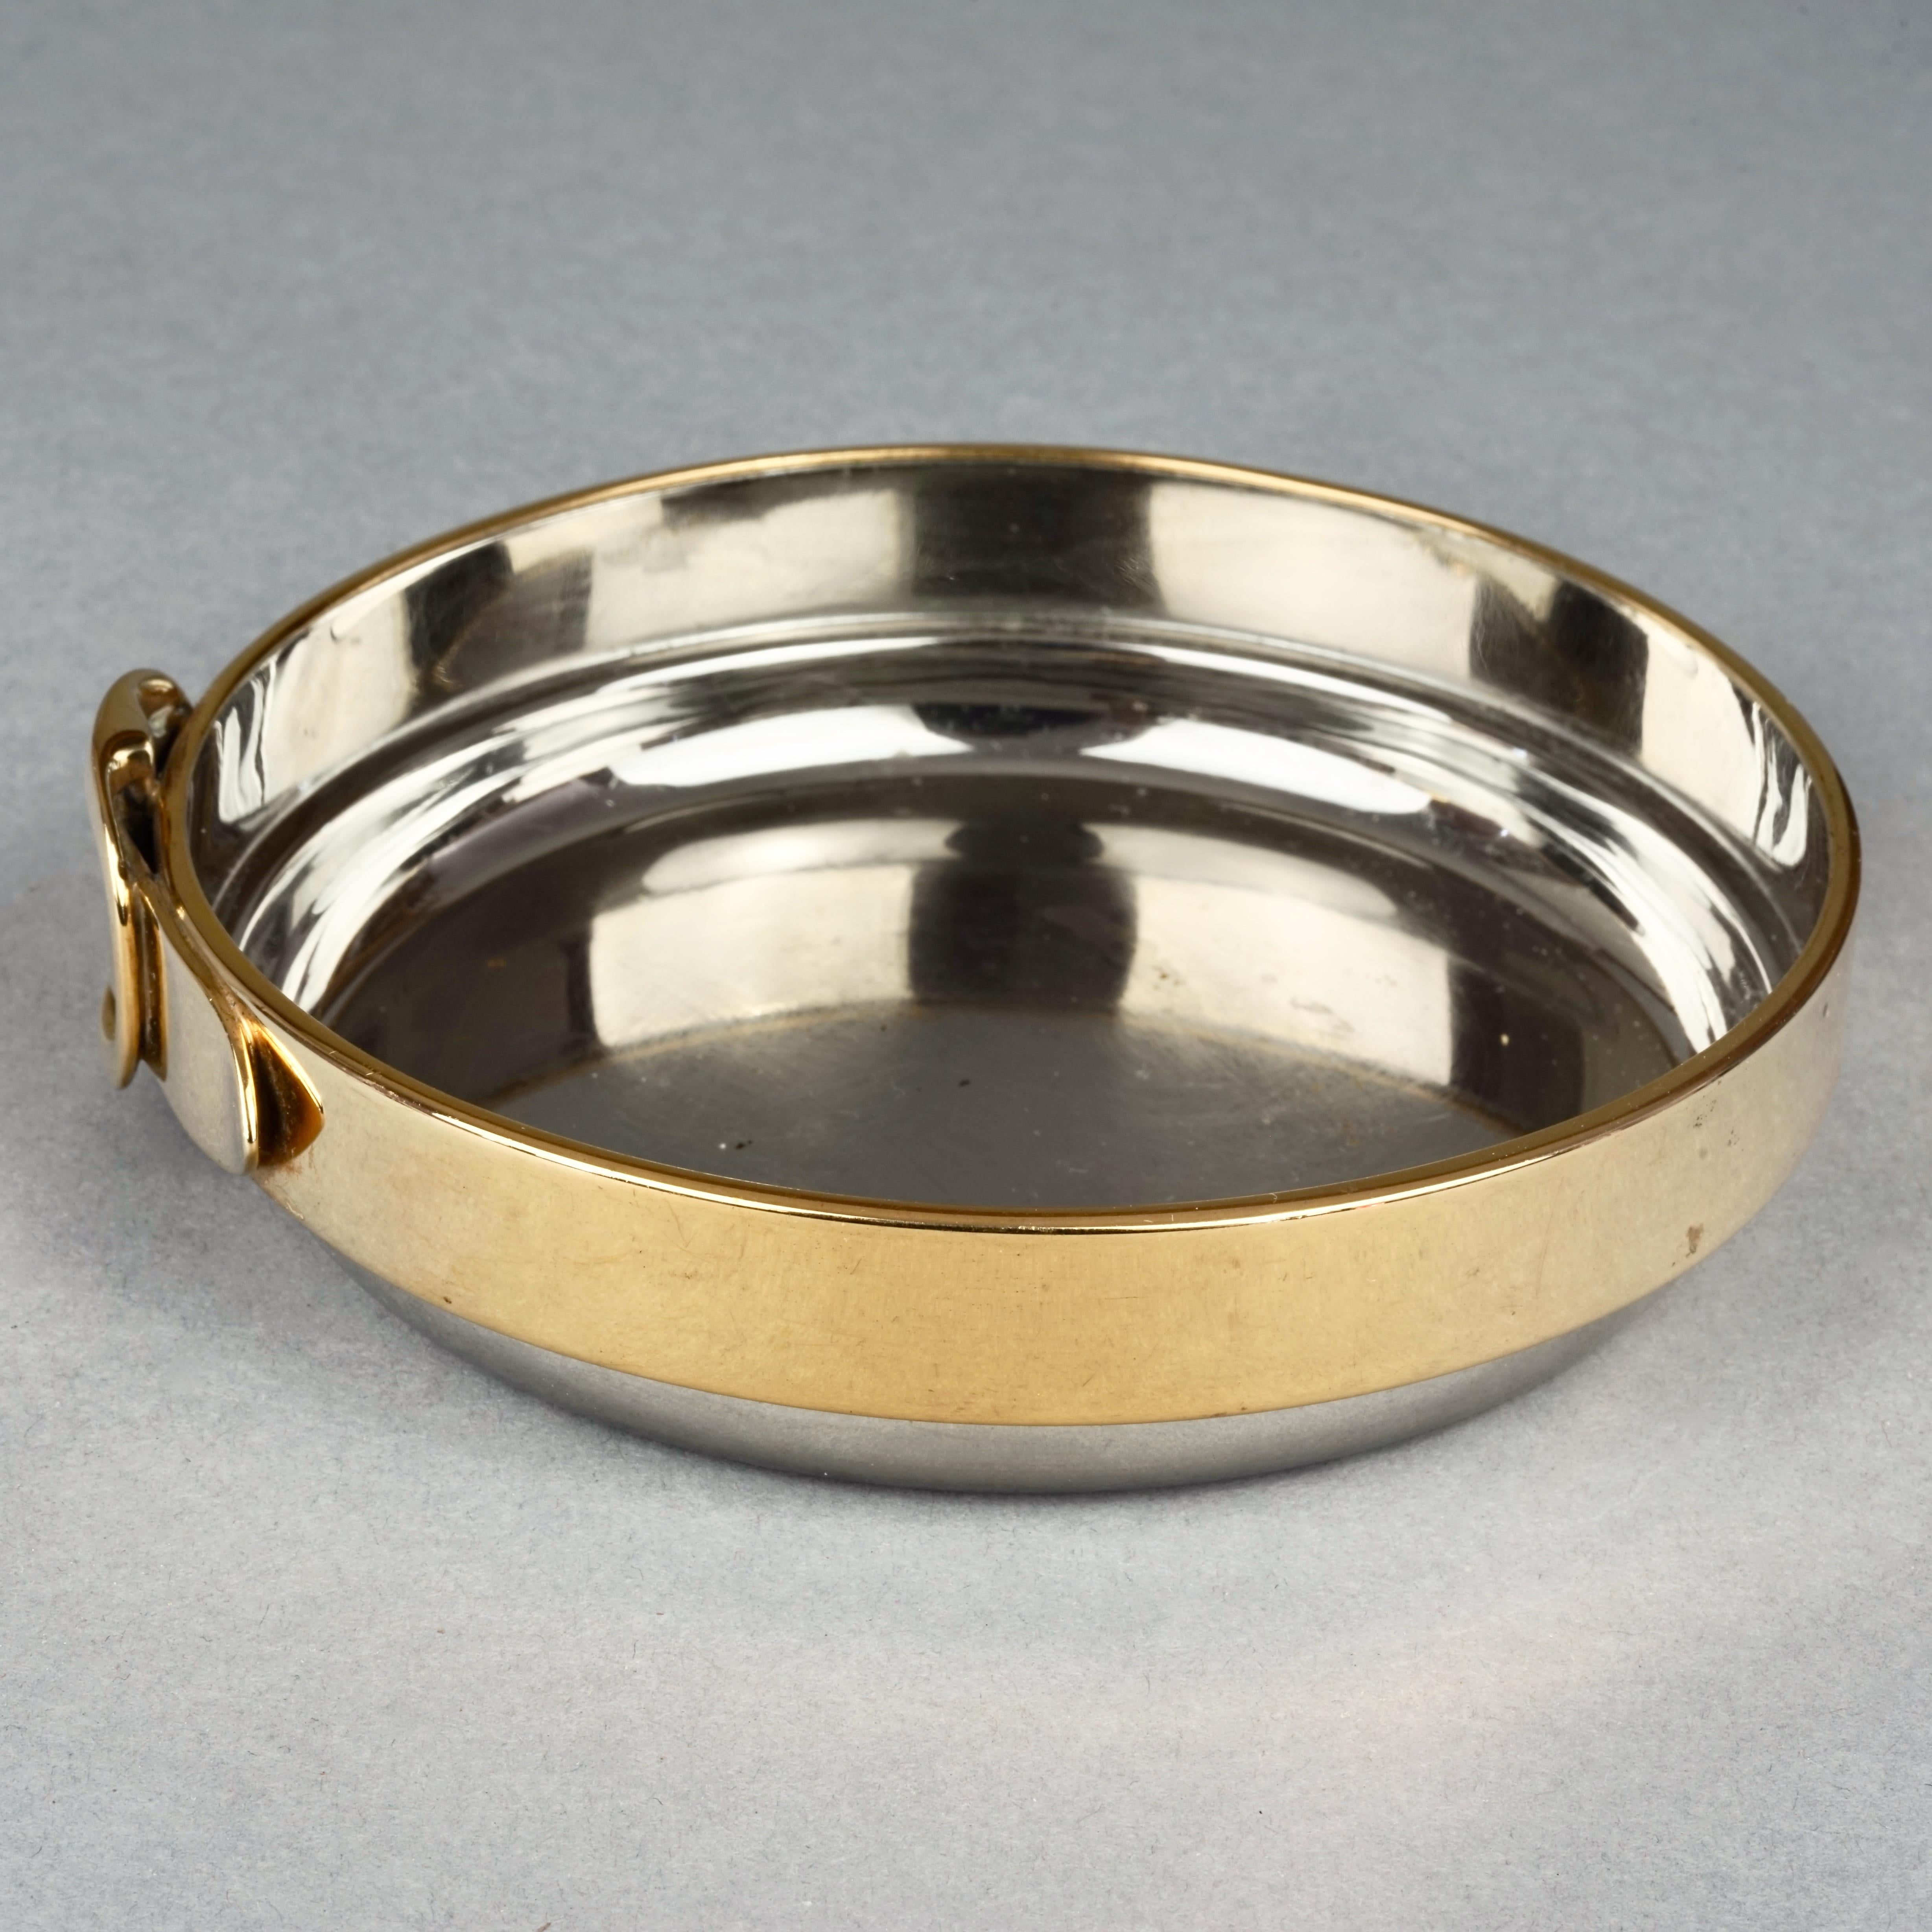 Vintage HERMES Buckle Vide Poche Gold and Silver Catch All Dish

Measurements:
Total Height: 1.34 inches (3.4 cm)
Diameter: 4.84 inches (12.3 cm)

Features:
- 100% Authentic HERMES.
- Buckle accent vide poche/ catch all dish.
- Gold and silver